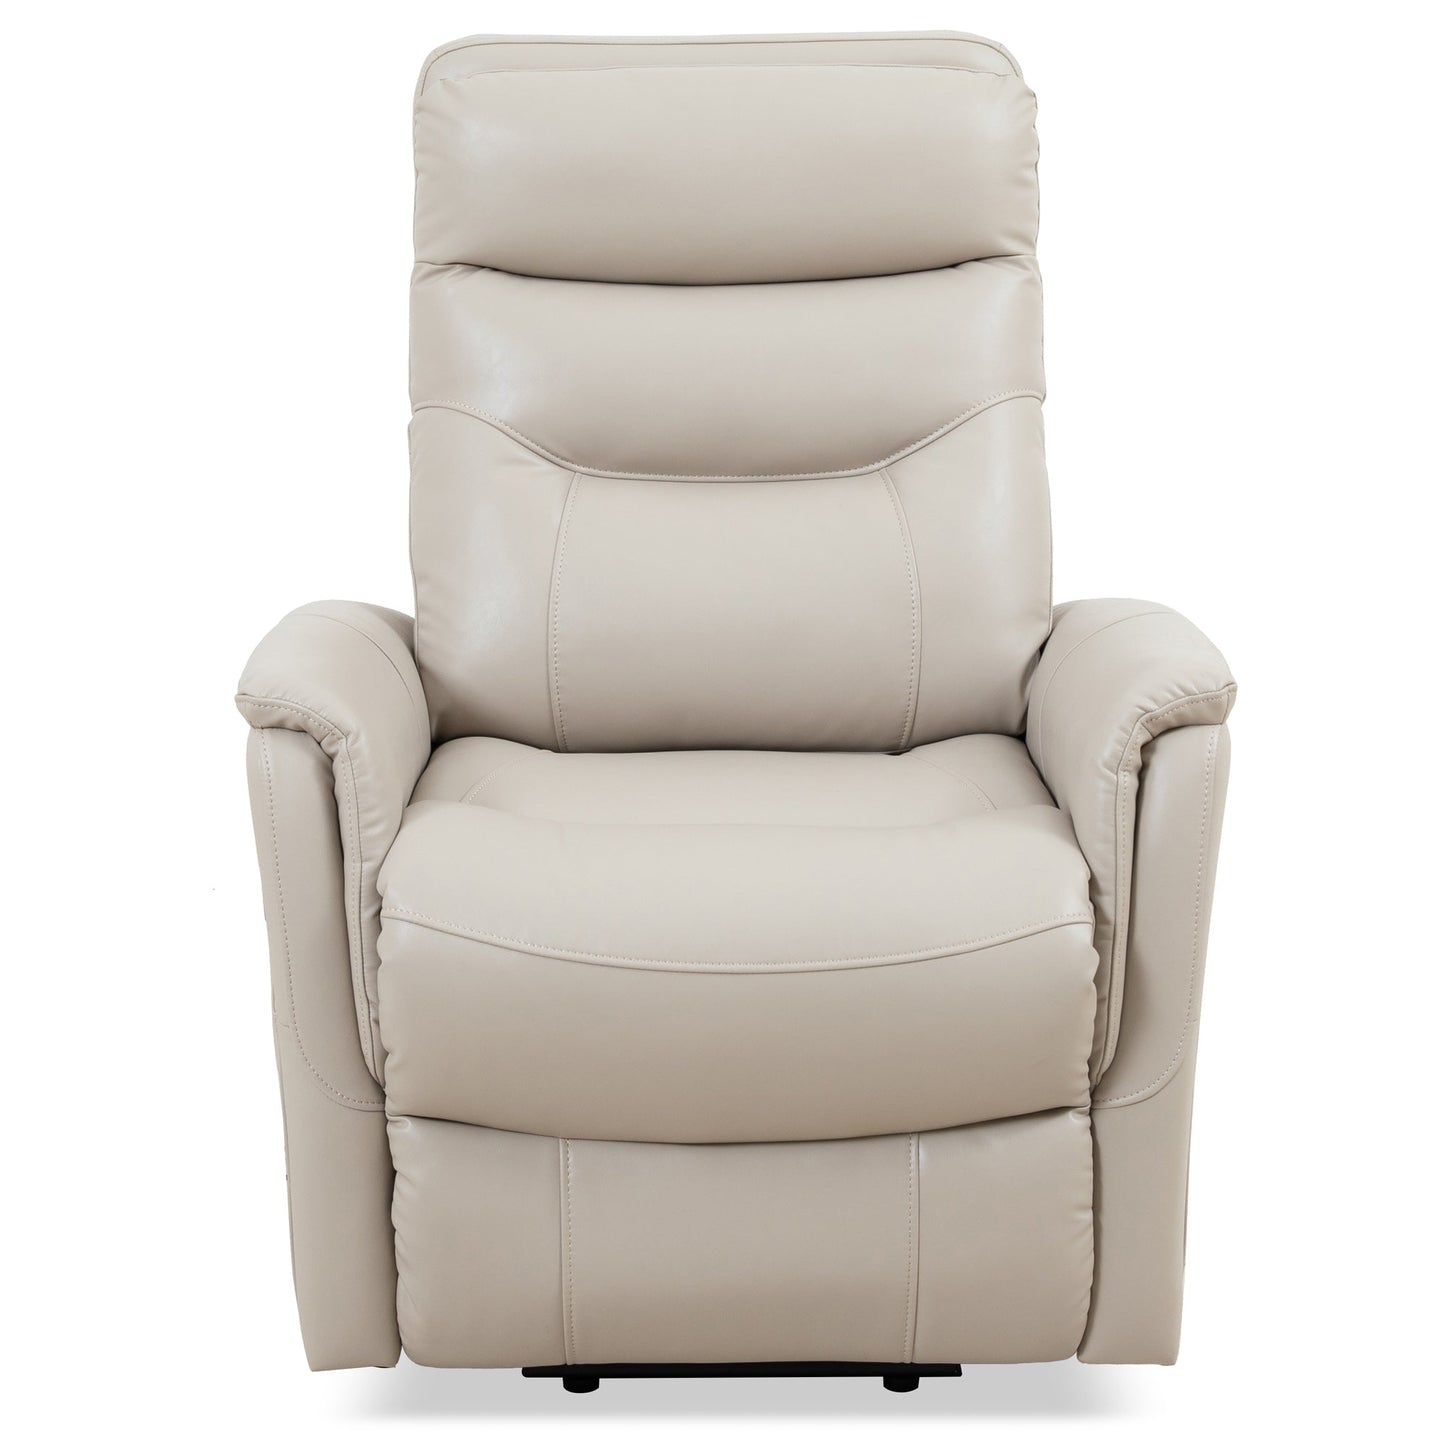 GEMINI - SOFT IVORY POWER LIFT RECLINER WITH ARTICULATING HEADREST